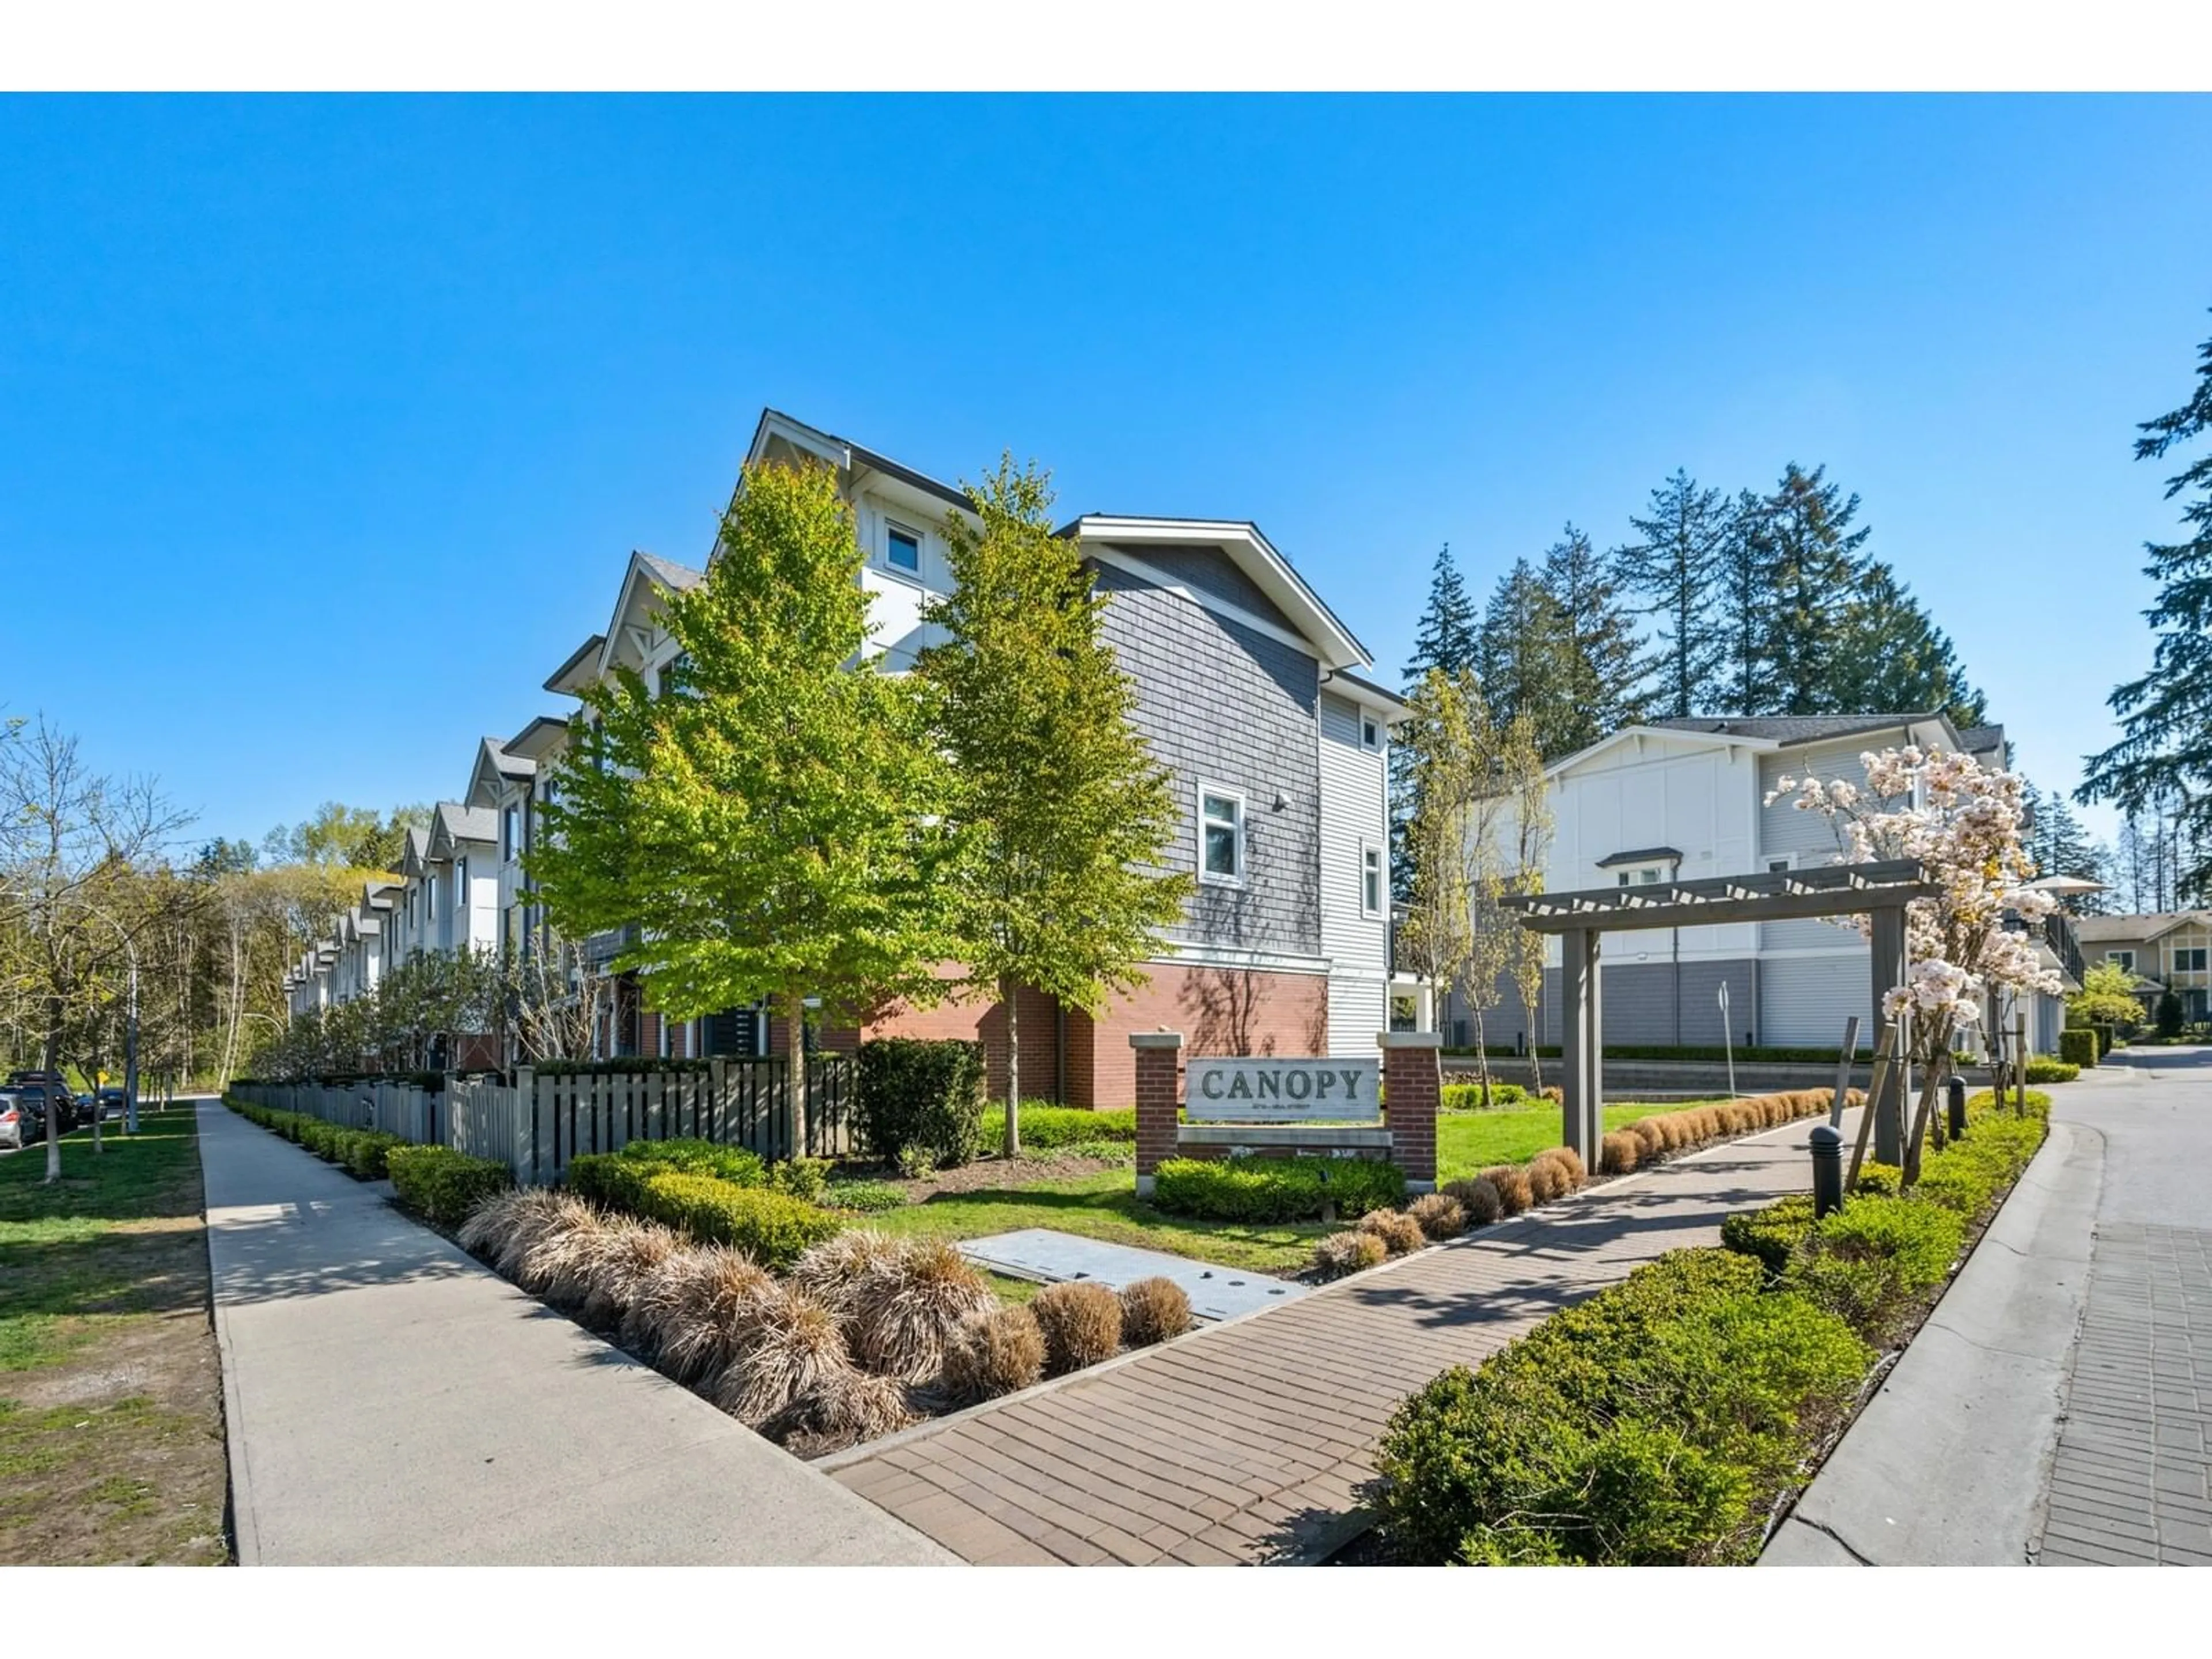 A pic from exterior of the house or condo for 75 9718 161A STREET, Surrey British Columbia V4N6S7